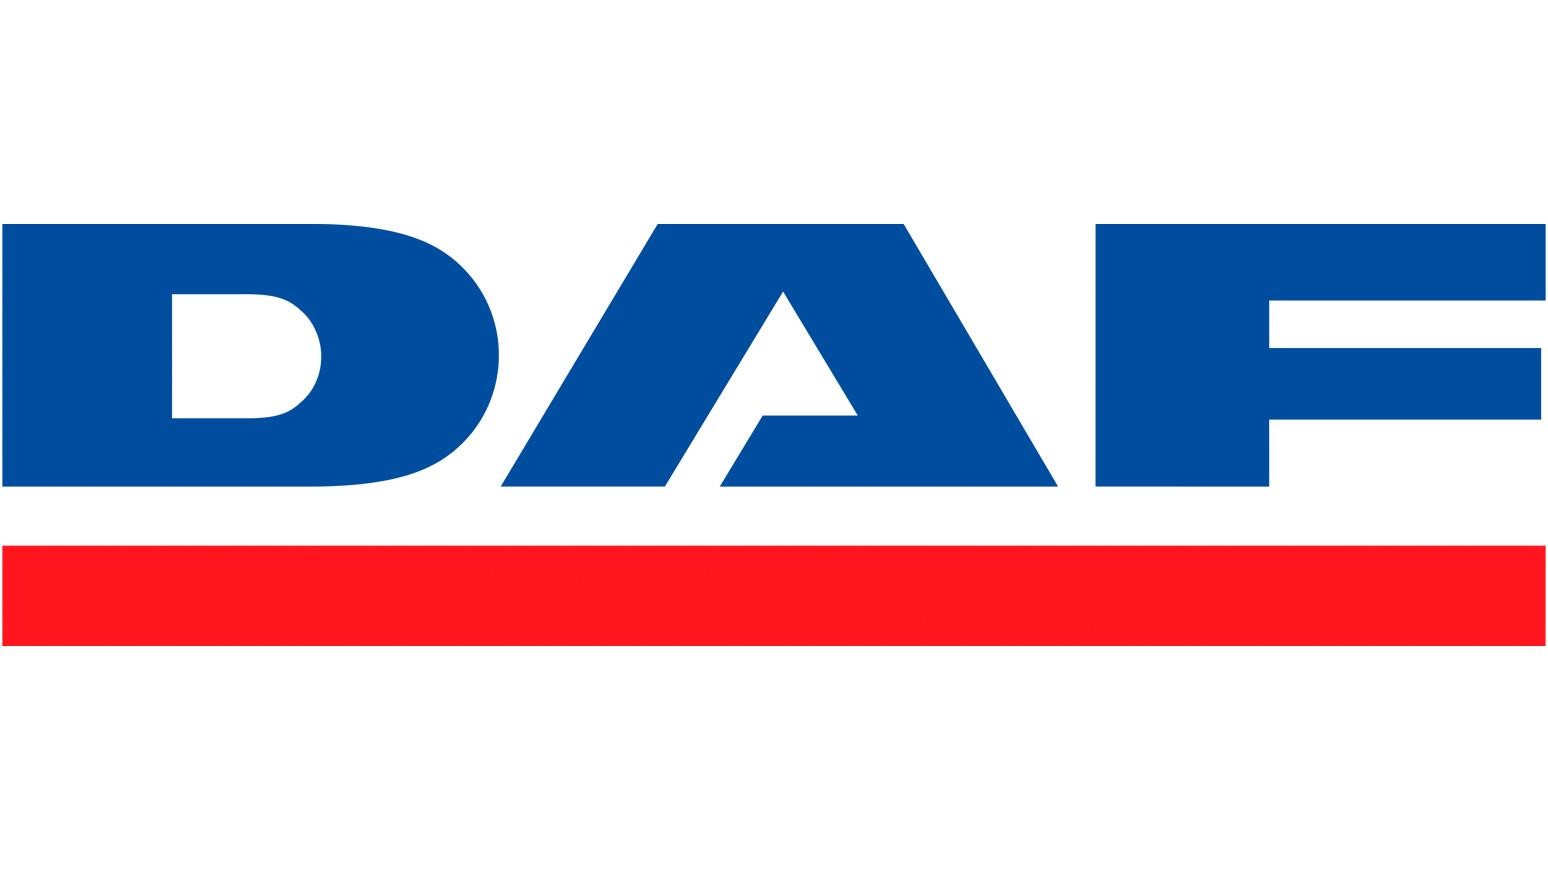 PACCAR Releases Q1 2020 Financial Results, Including Record Pretax PACCAR Parts Income